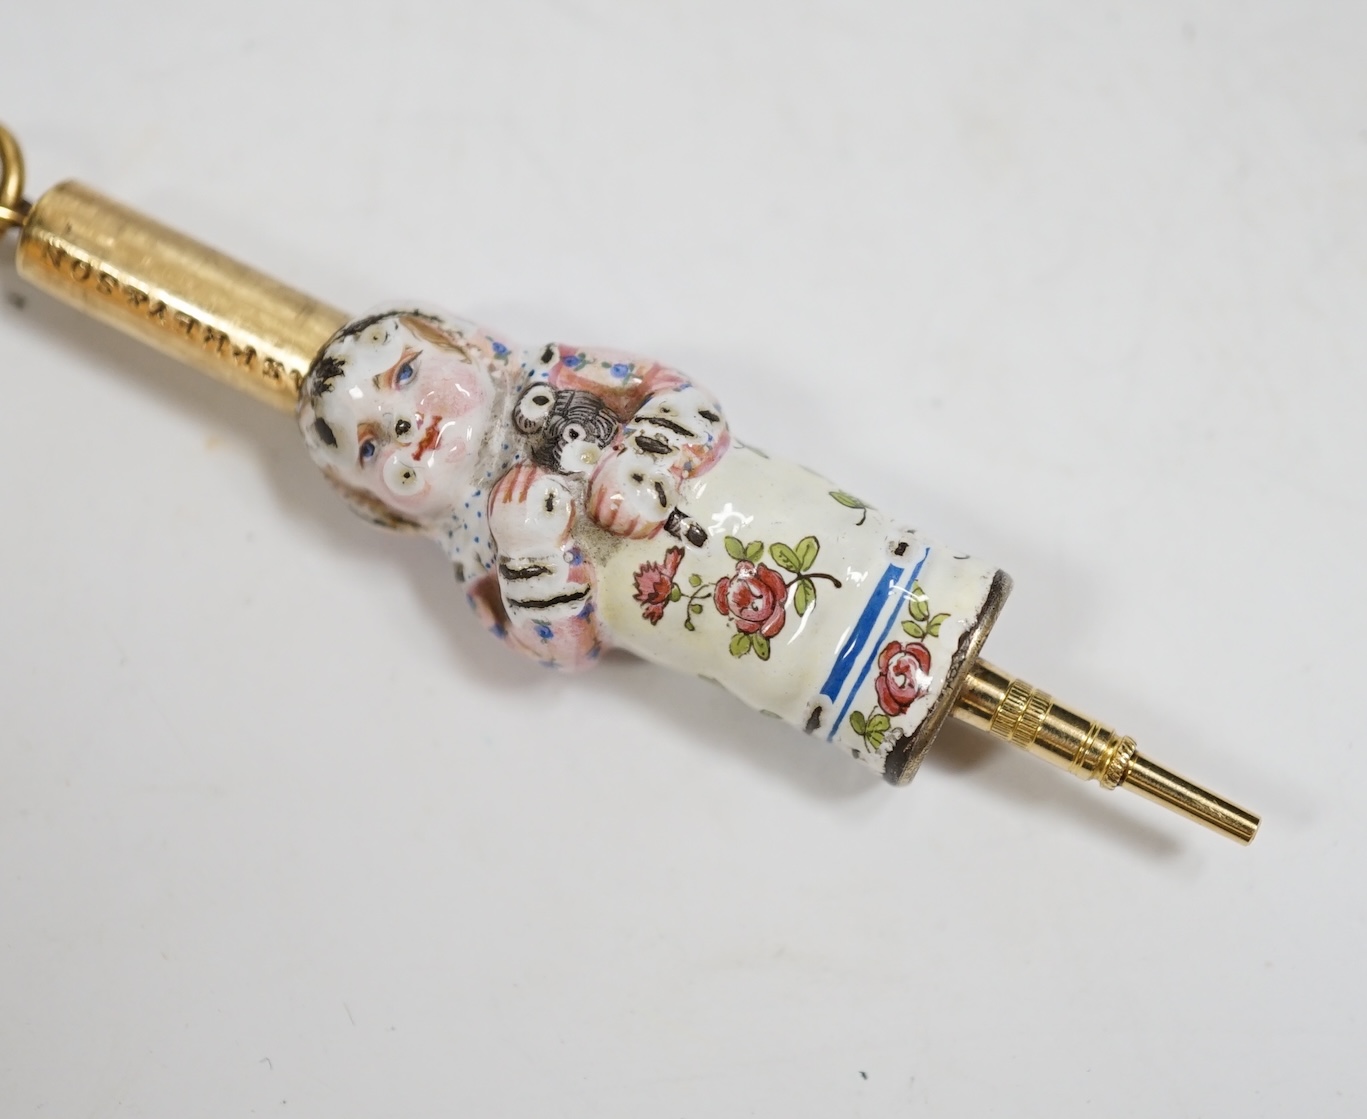 A rare Asprey and Son gilt metal and enamel novelty propelling pencil, c.1875, modelled as an infant holding a rattle. Condition - fair, losses to enamel